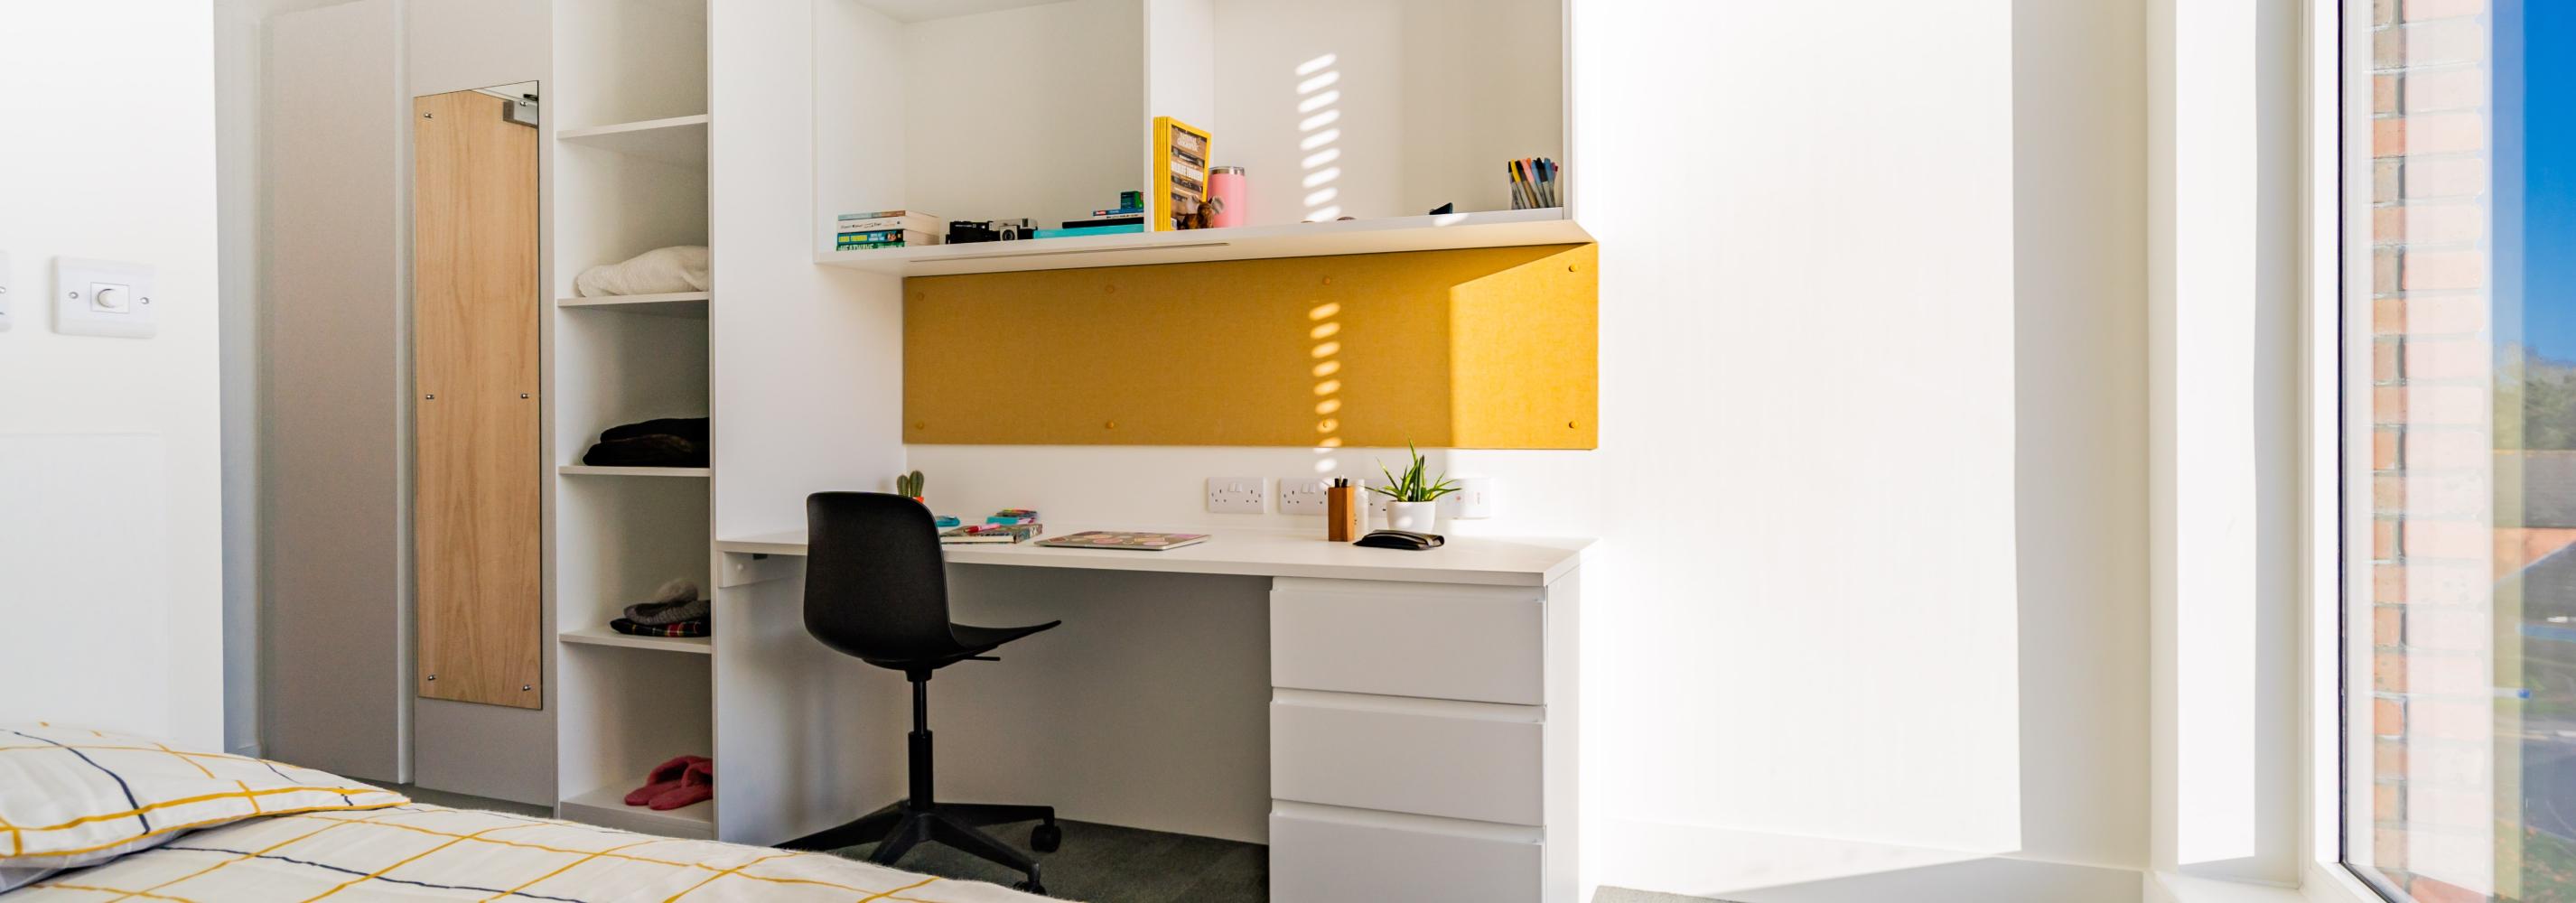 A typical single room with a large full height window and windowsill. A study desk and chair are next to the window with lots of storage space and a built in pinboard. Next to the desk is a floor to ceiling set of deep shelves and a wardrobe.